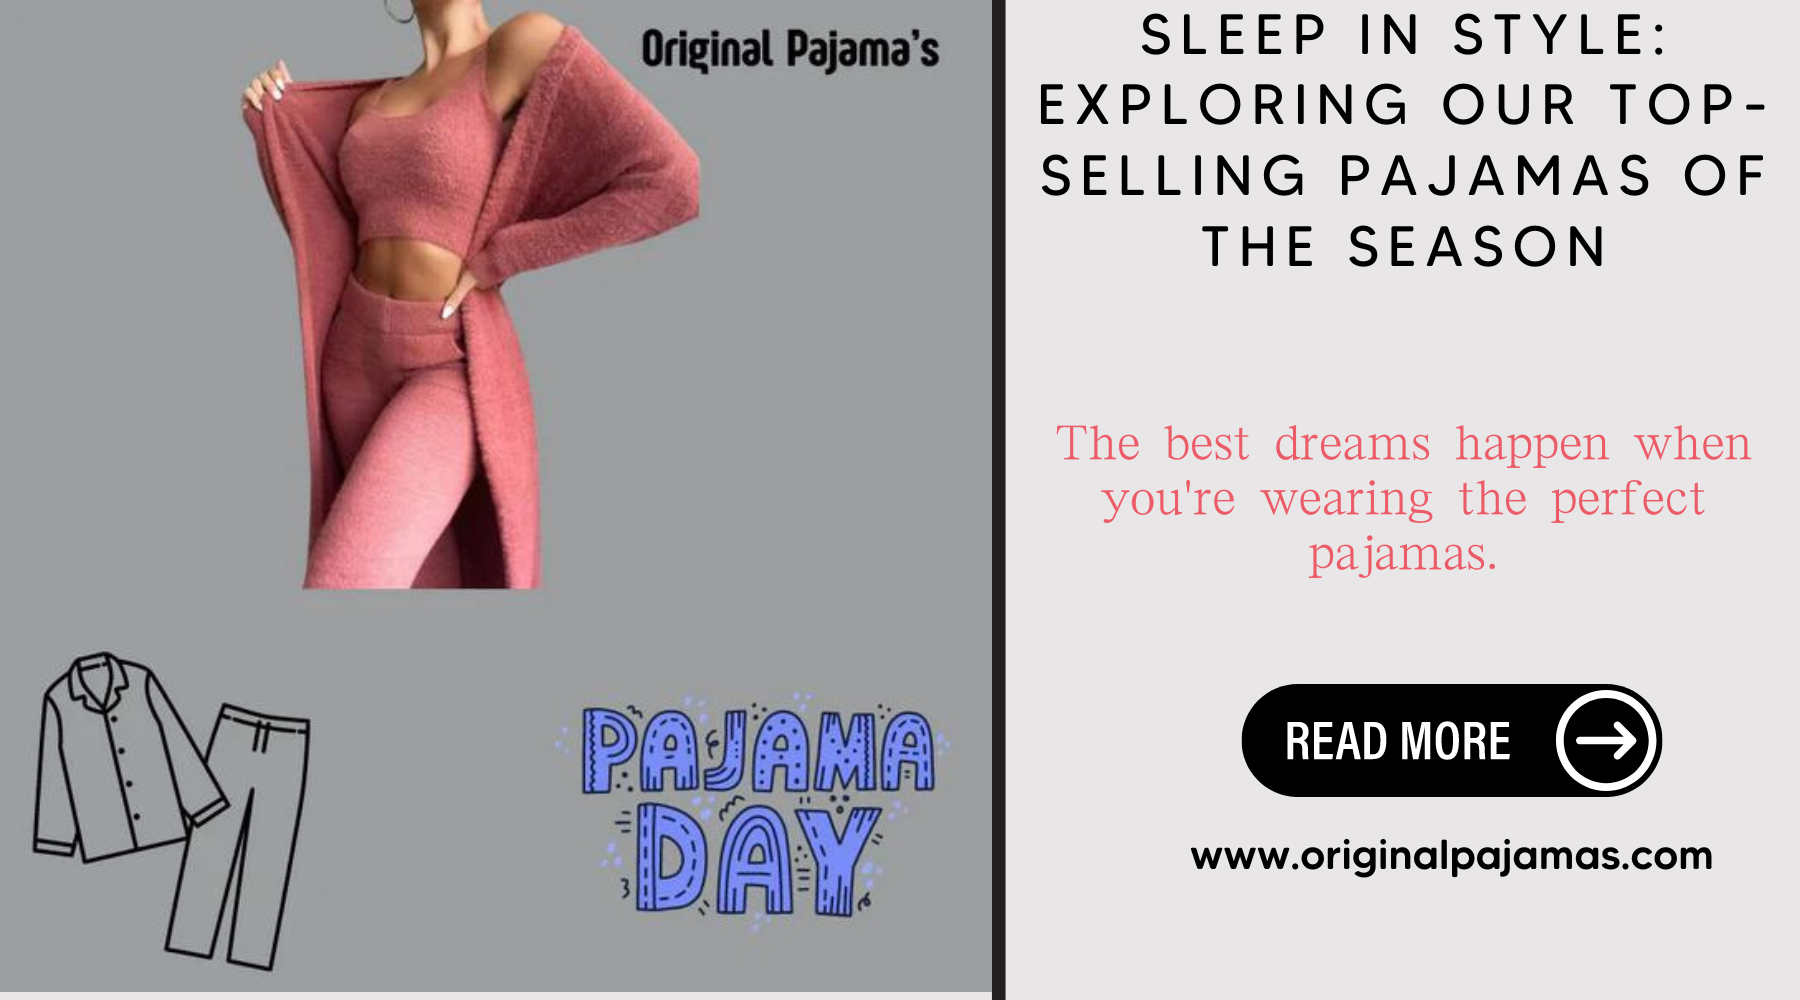 Sleep in Style: Exploring Our Top-Selling Pajamas of the Season